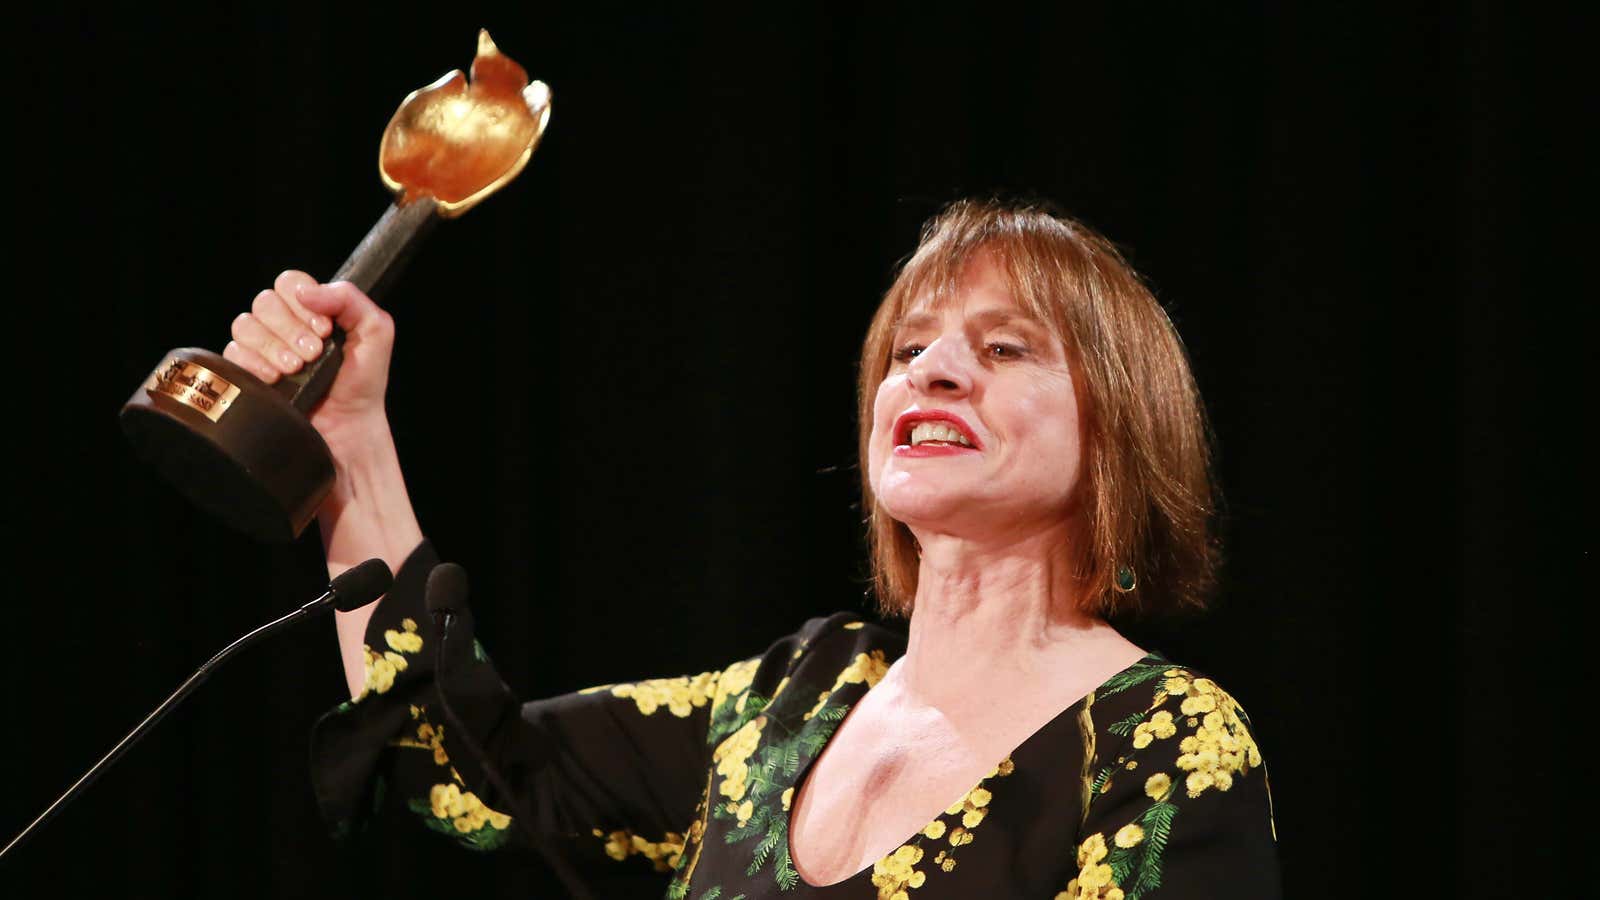 Mess with LuPone, get the horns.